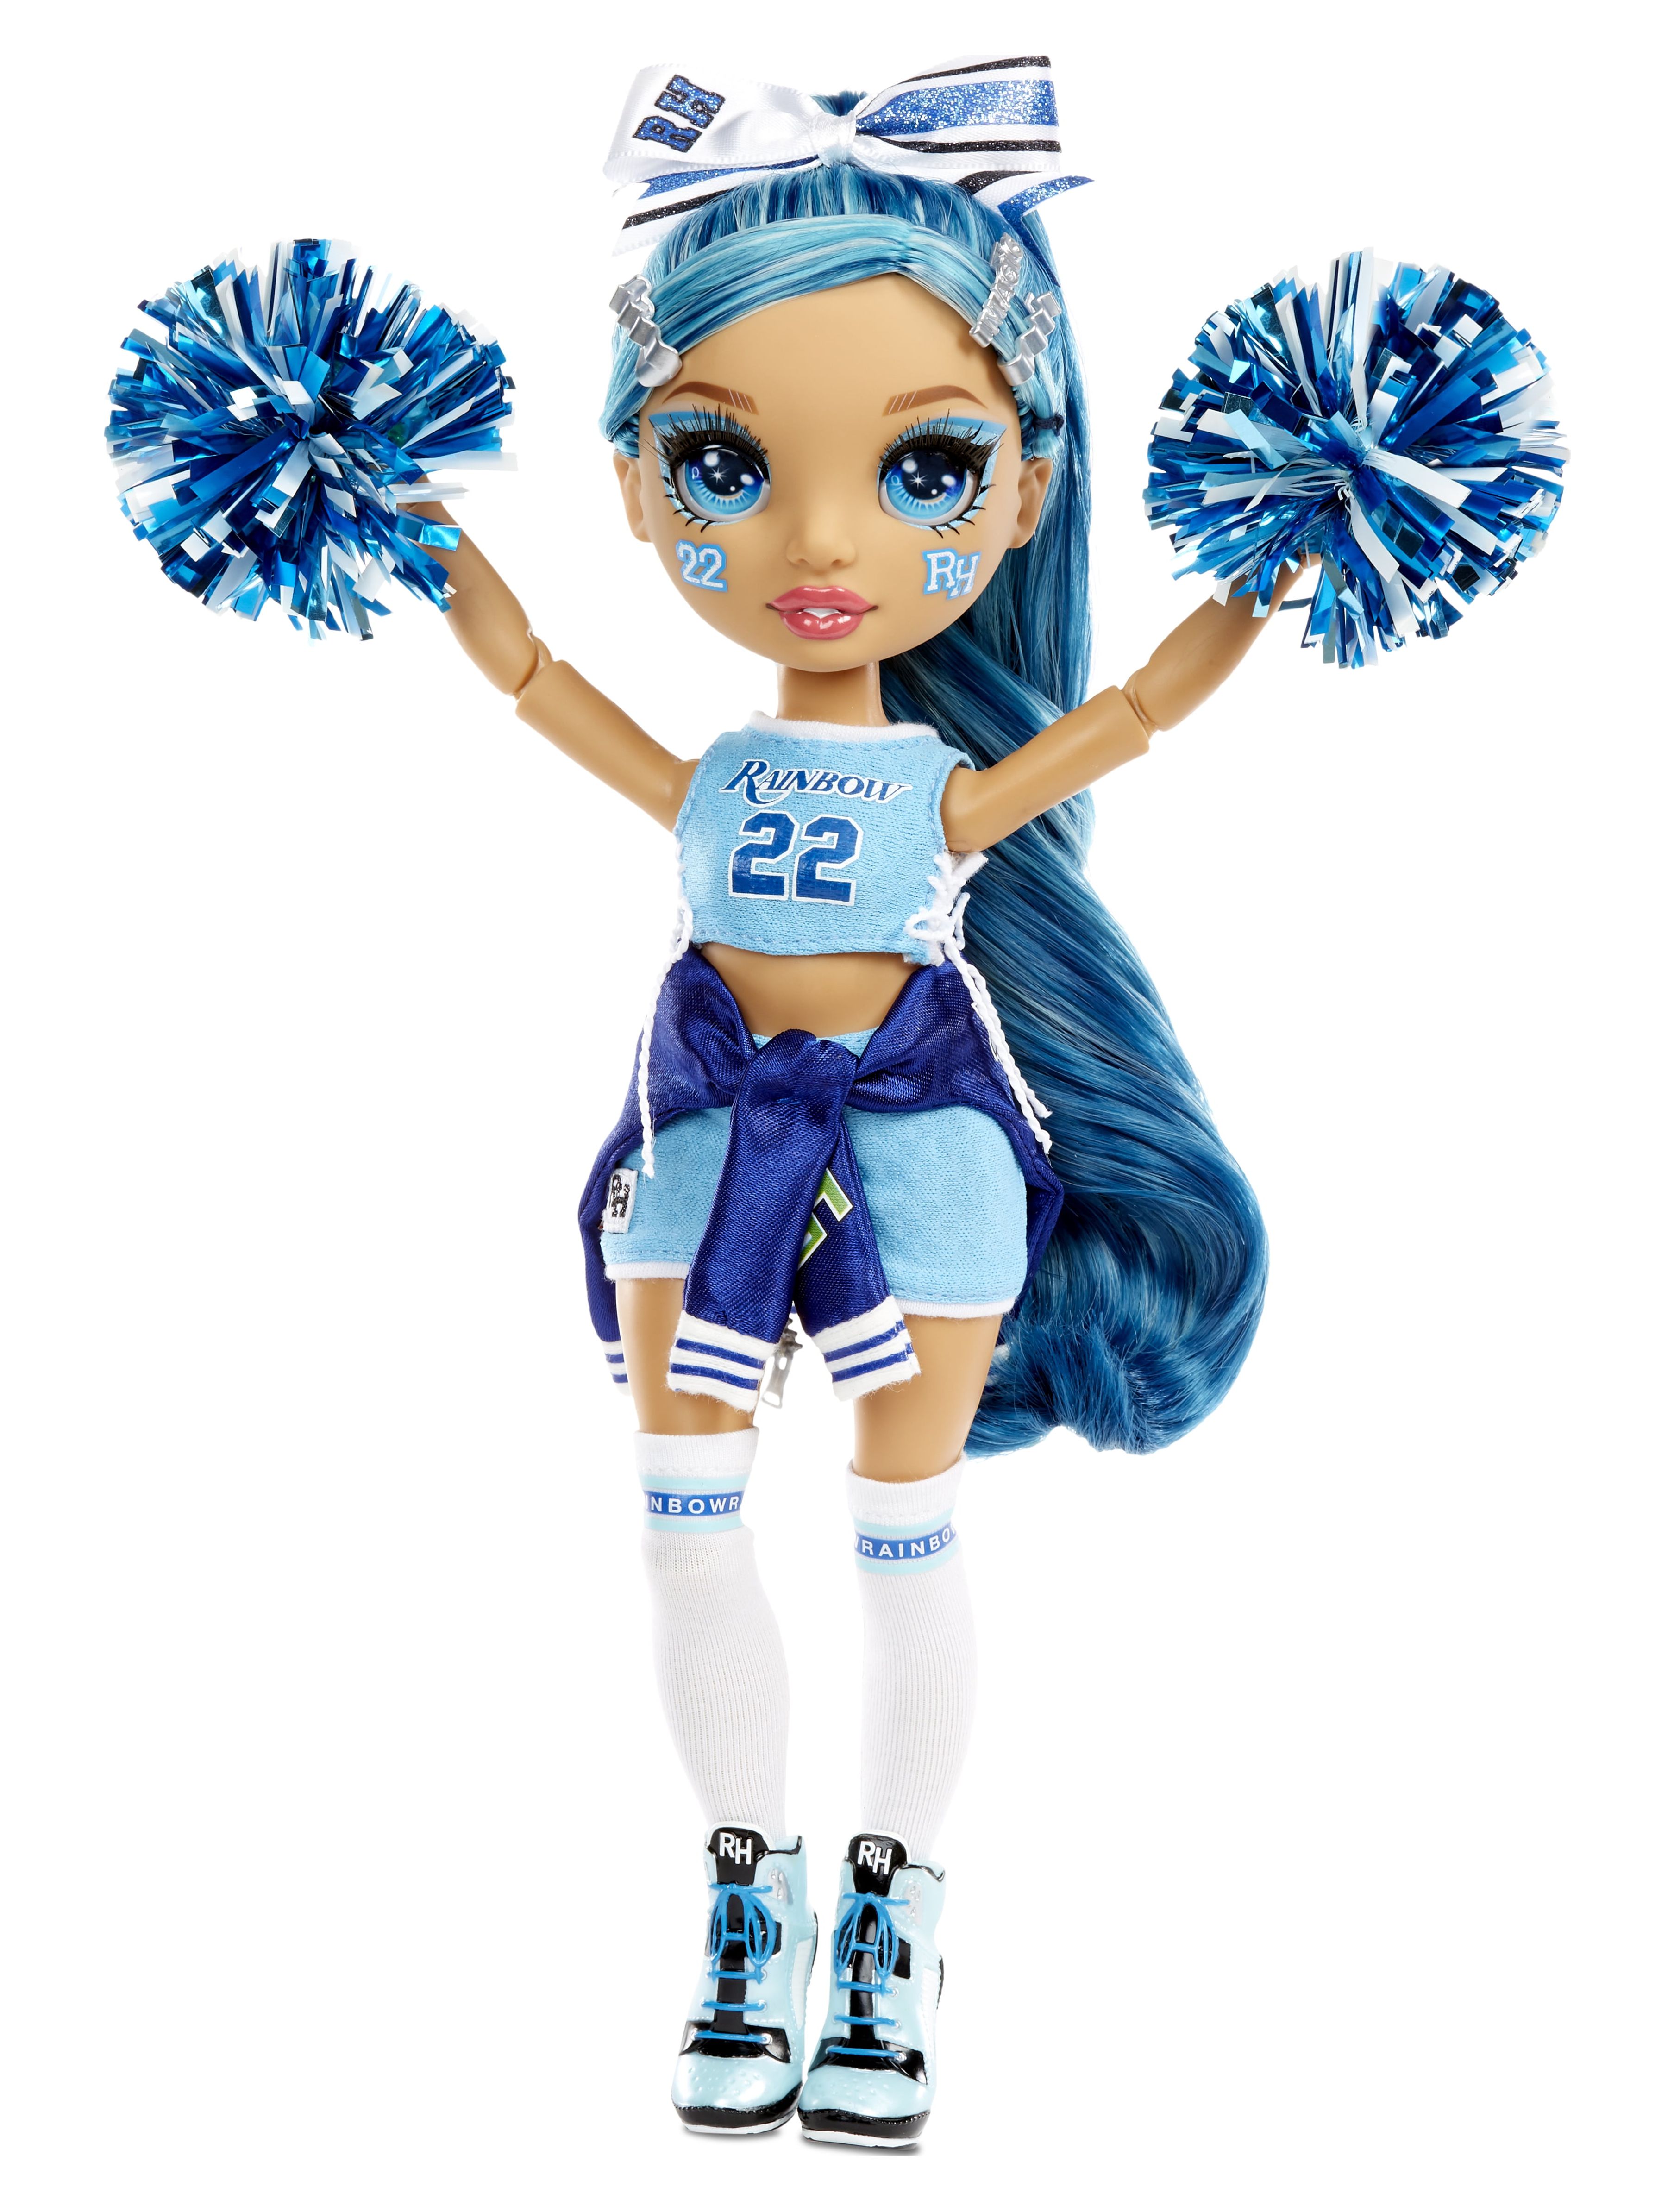 Rainbow High Cheer Skyler Bradshaw – Blue Fashion Doll with Pom Poms, Cheerleader Doll, Toys for Kids 6-12 Years Old - image 1 of 8